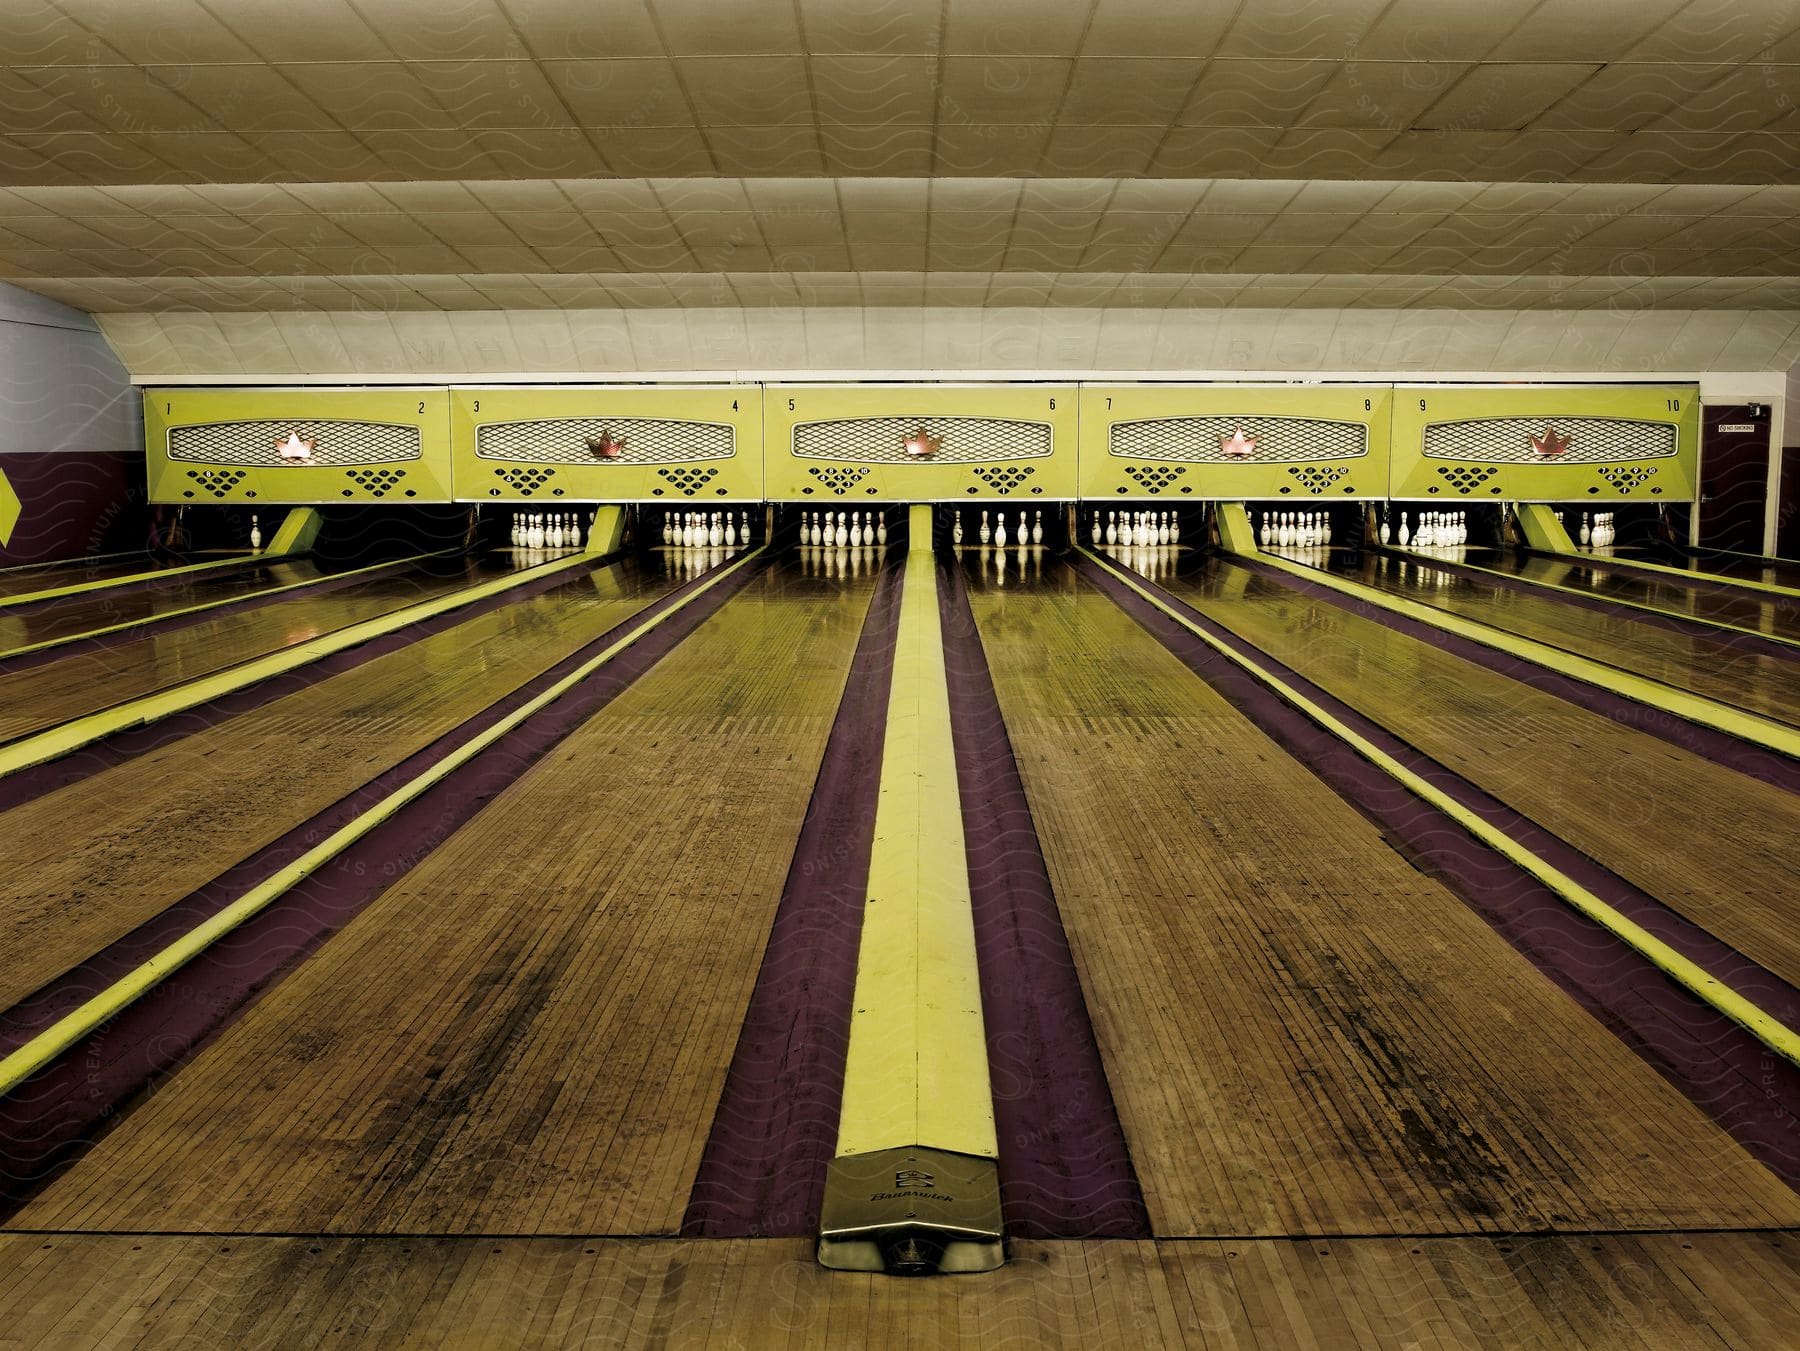 An unoccupied bowling alley with no bowling balls